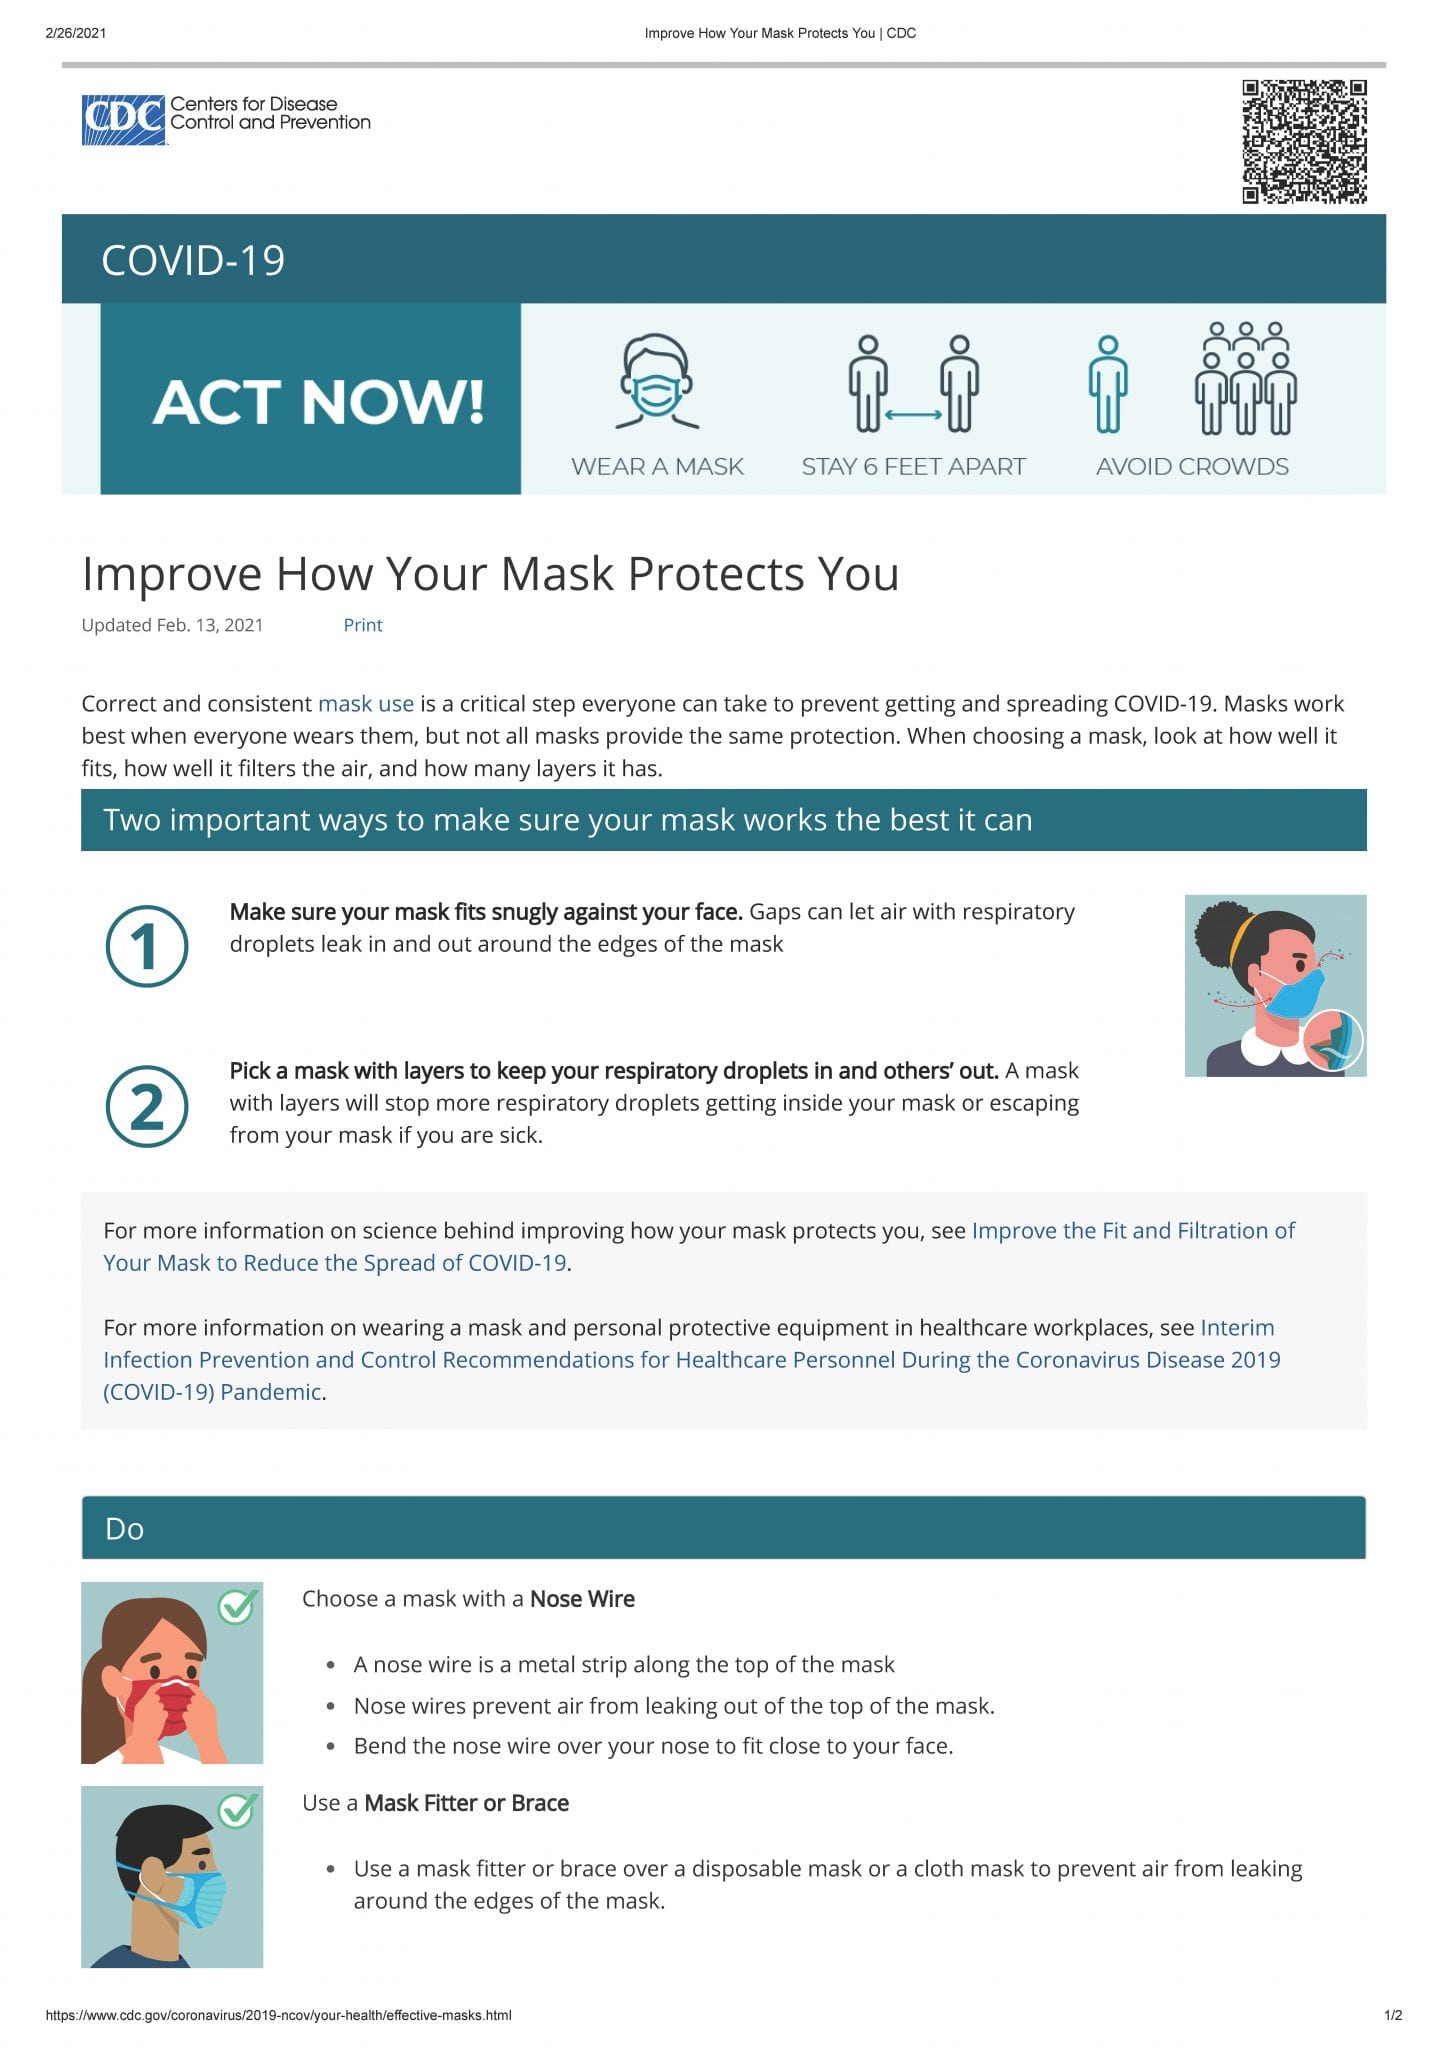 How to Improve Mask Protection